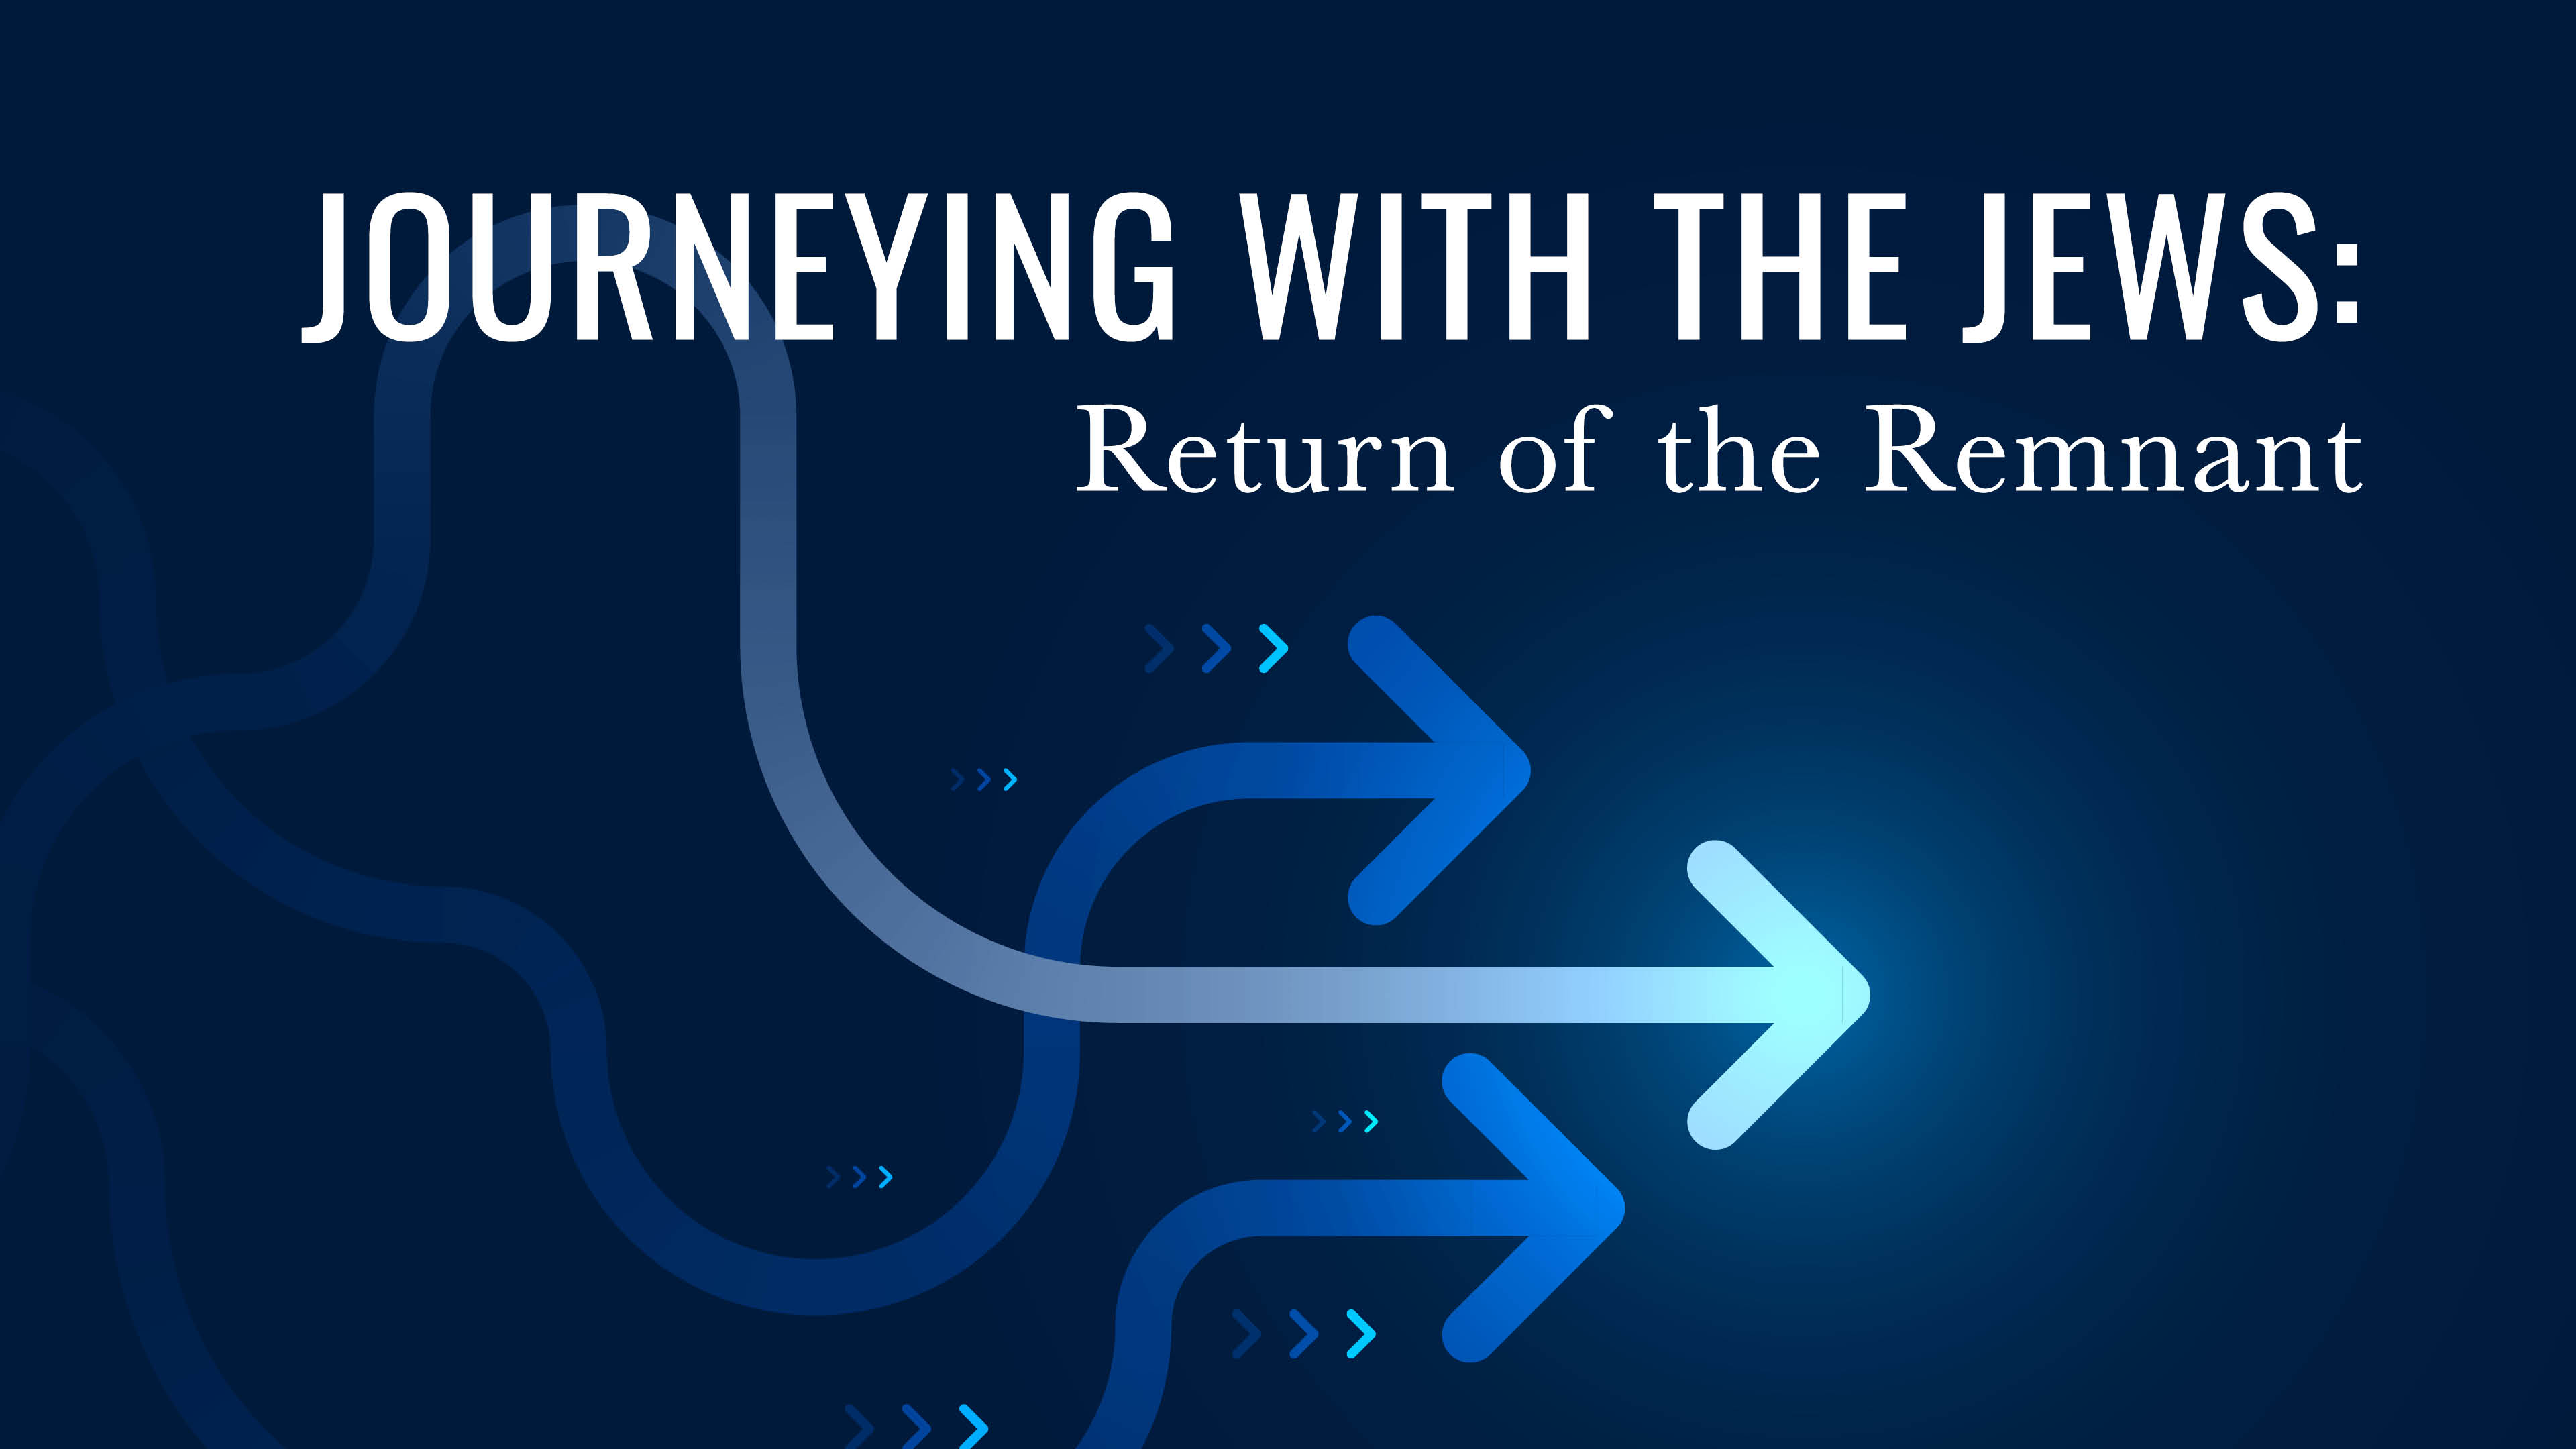 Journeying With the Jews: Return of the Remnant